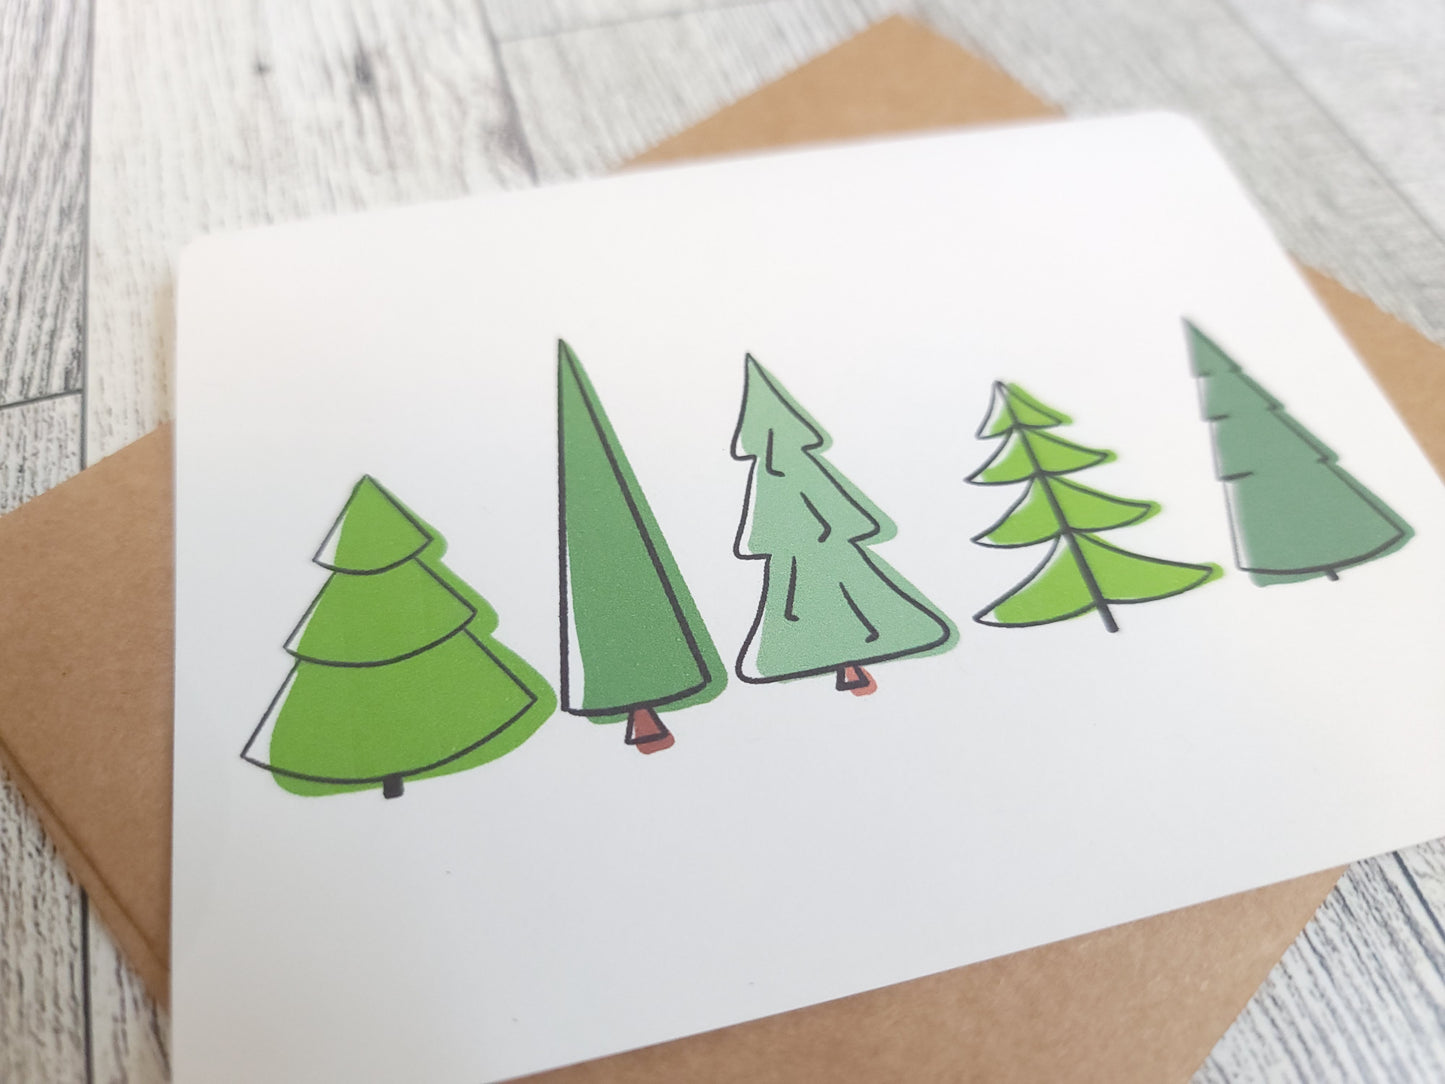 Pine Trees Handmade Greeting Card - Recycled Paper and Kraft Envelop - Angled Overhead Shot